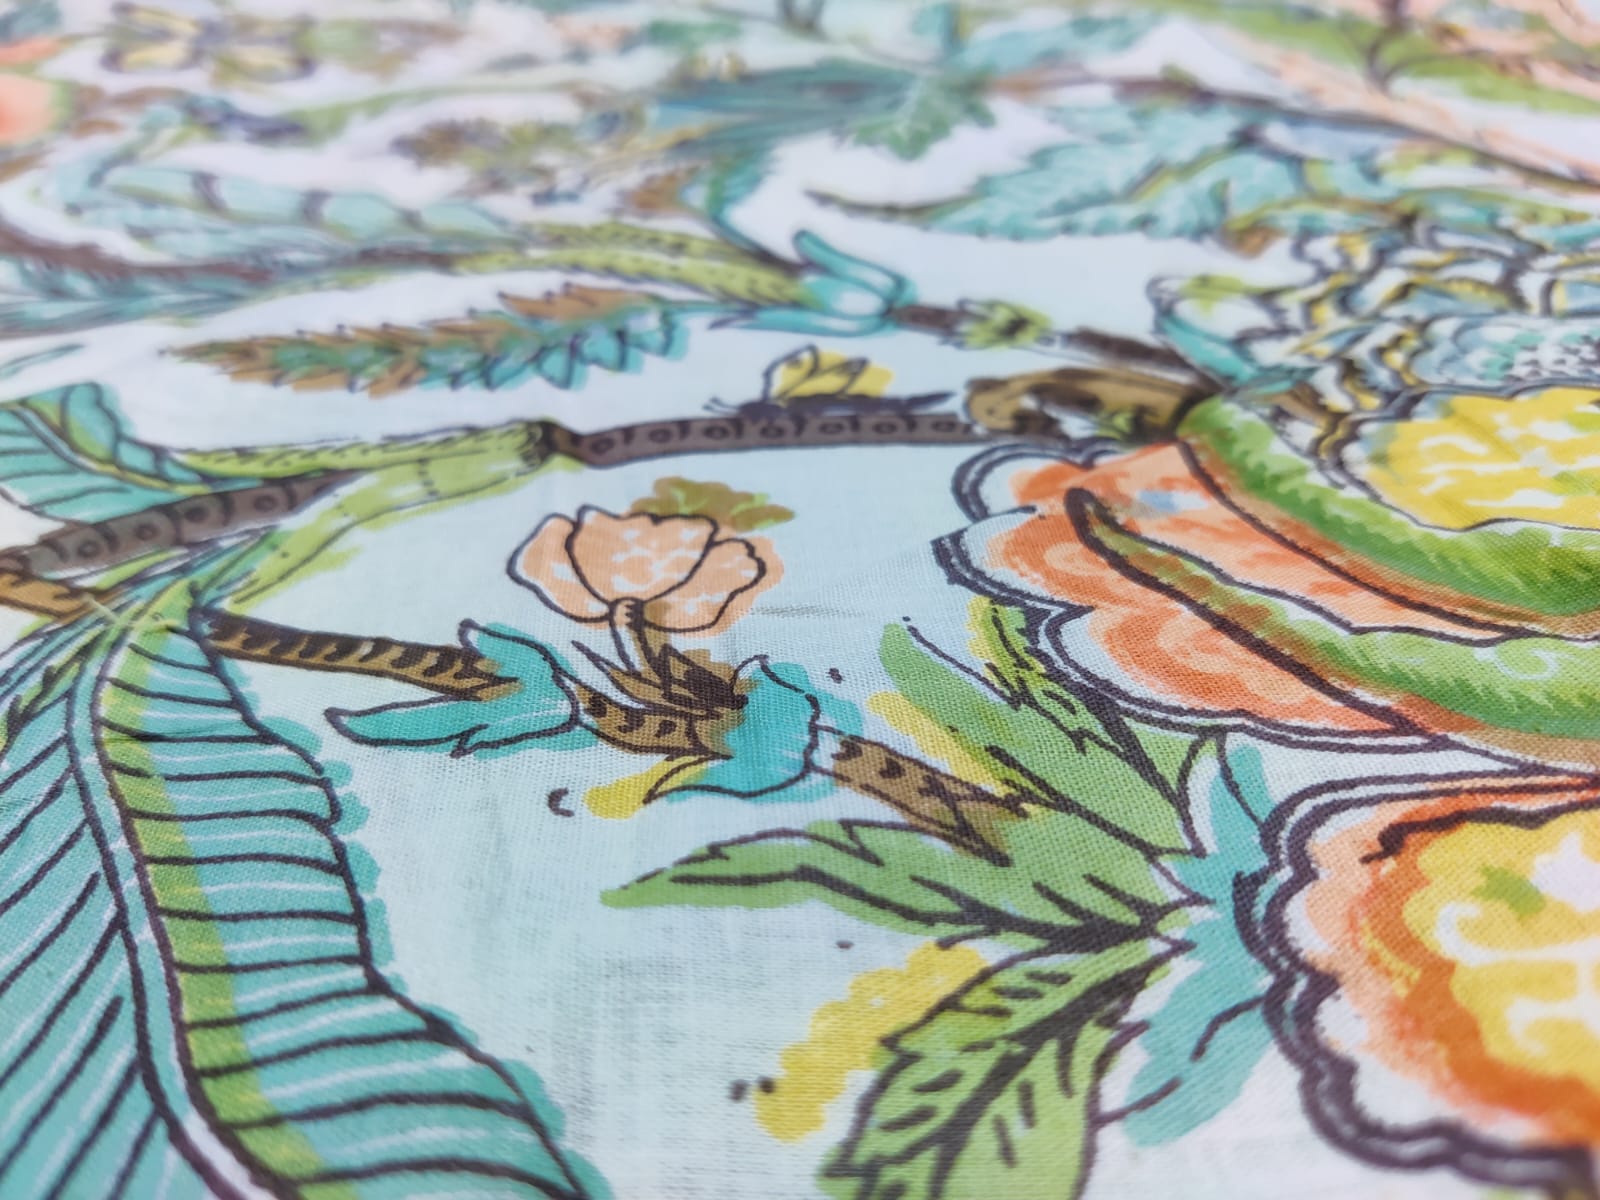 Tropical Voile Fabric Width 44 inches - The Teal Thread